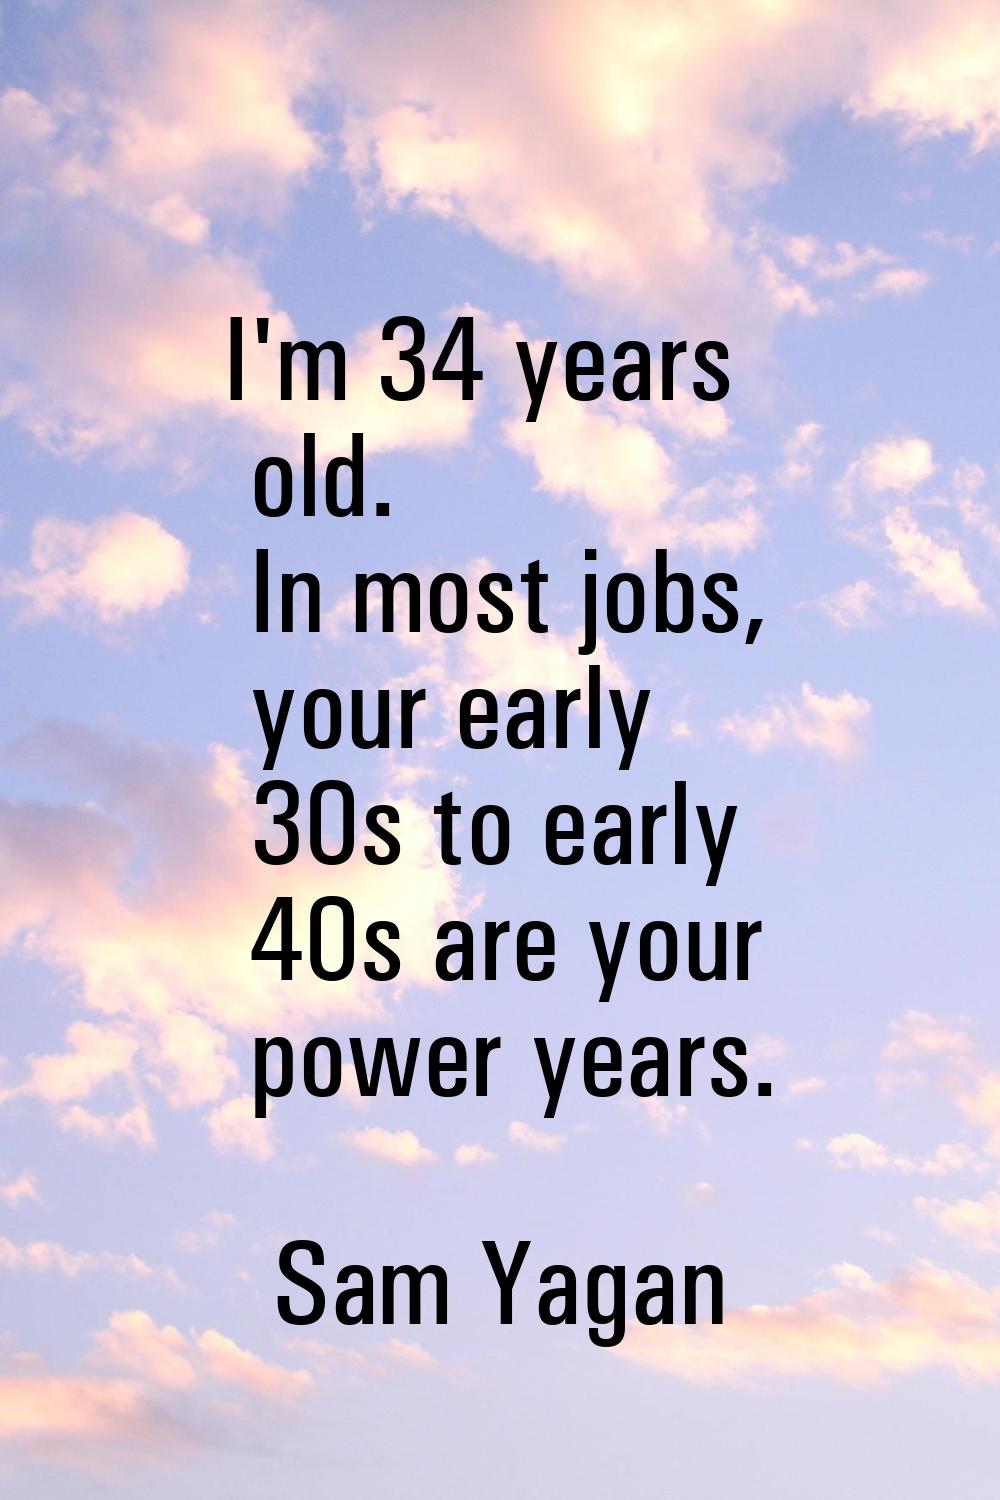 I'm 34 years old. In most jobs, your early 30s to early 40s are your power years.